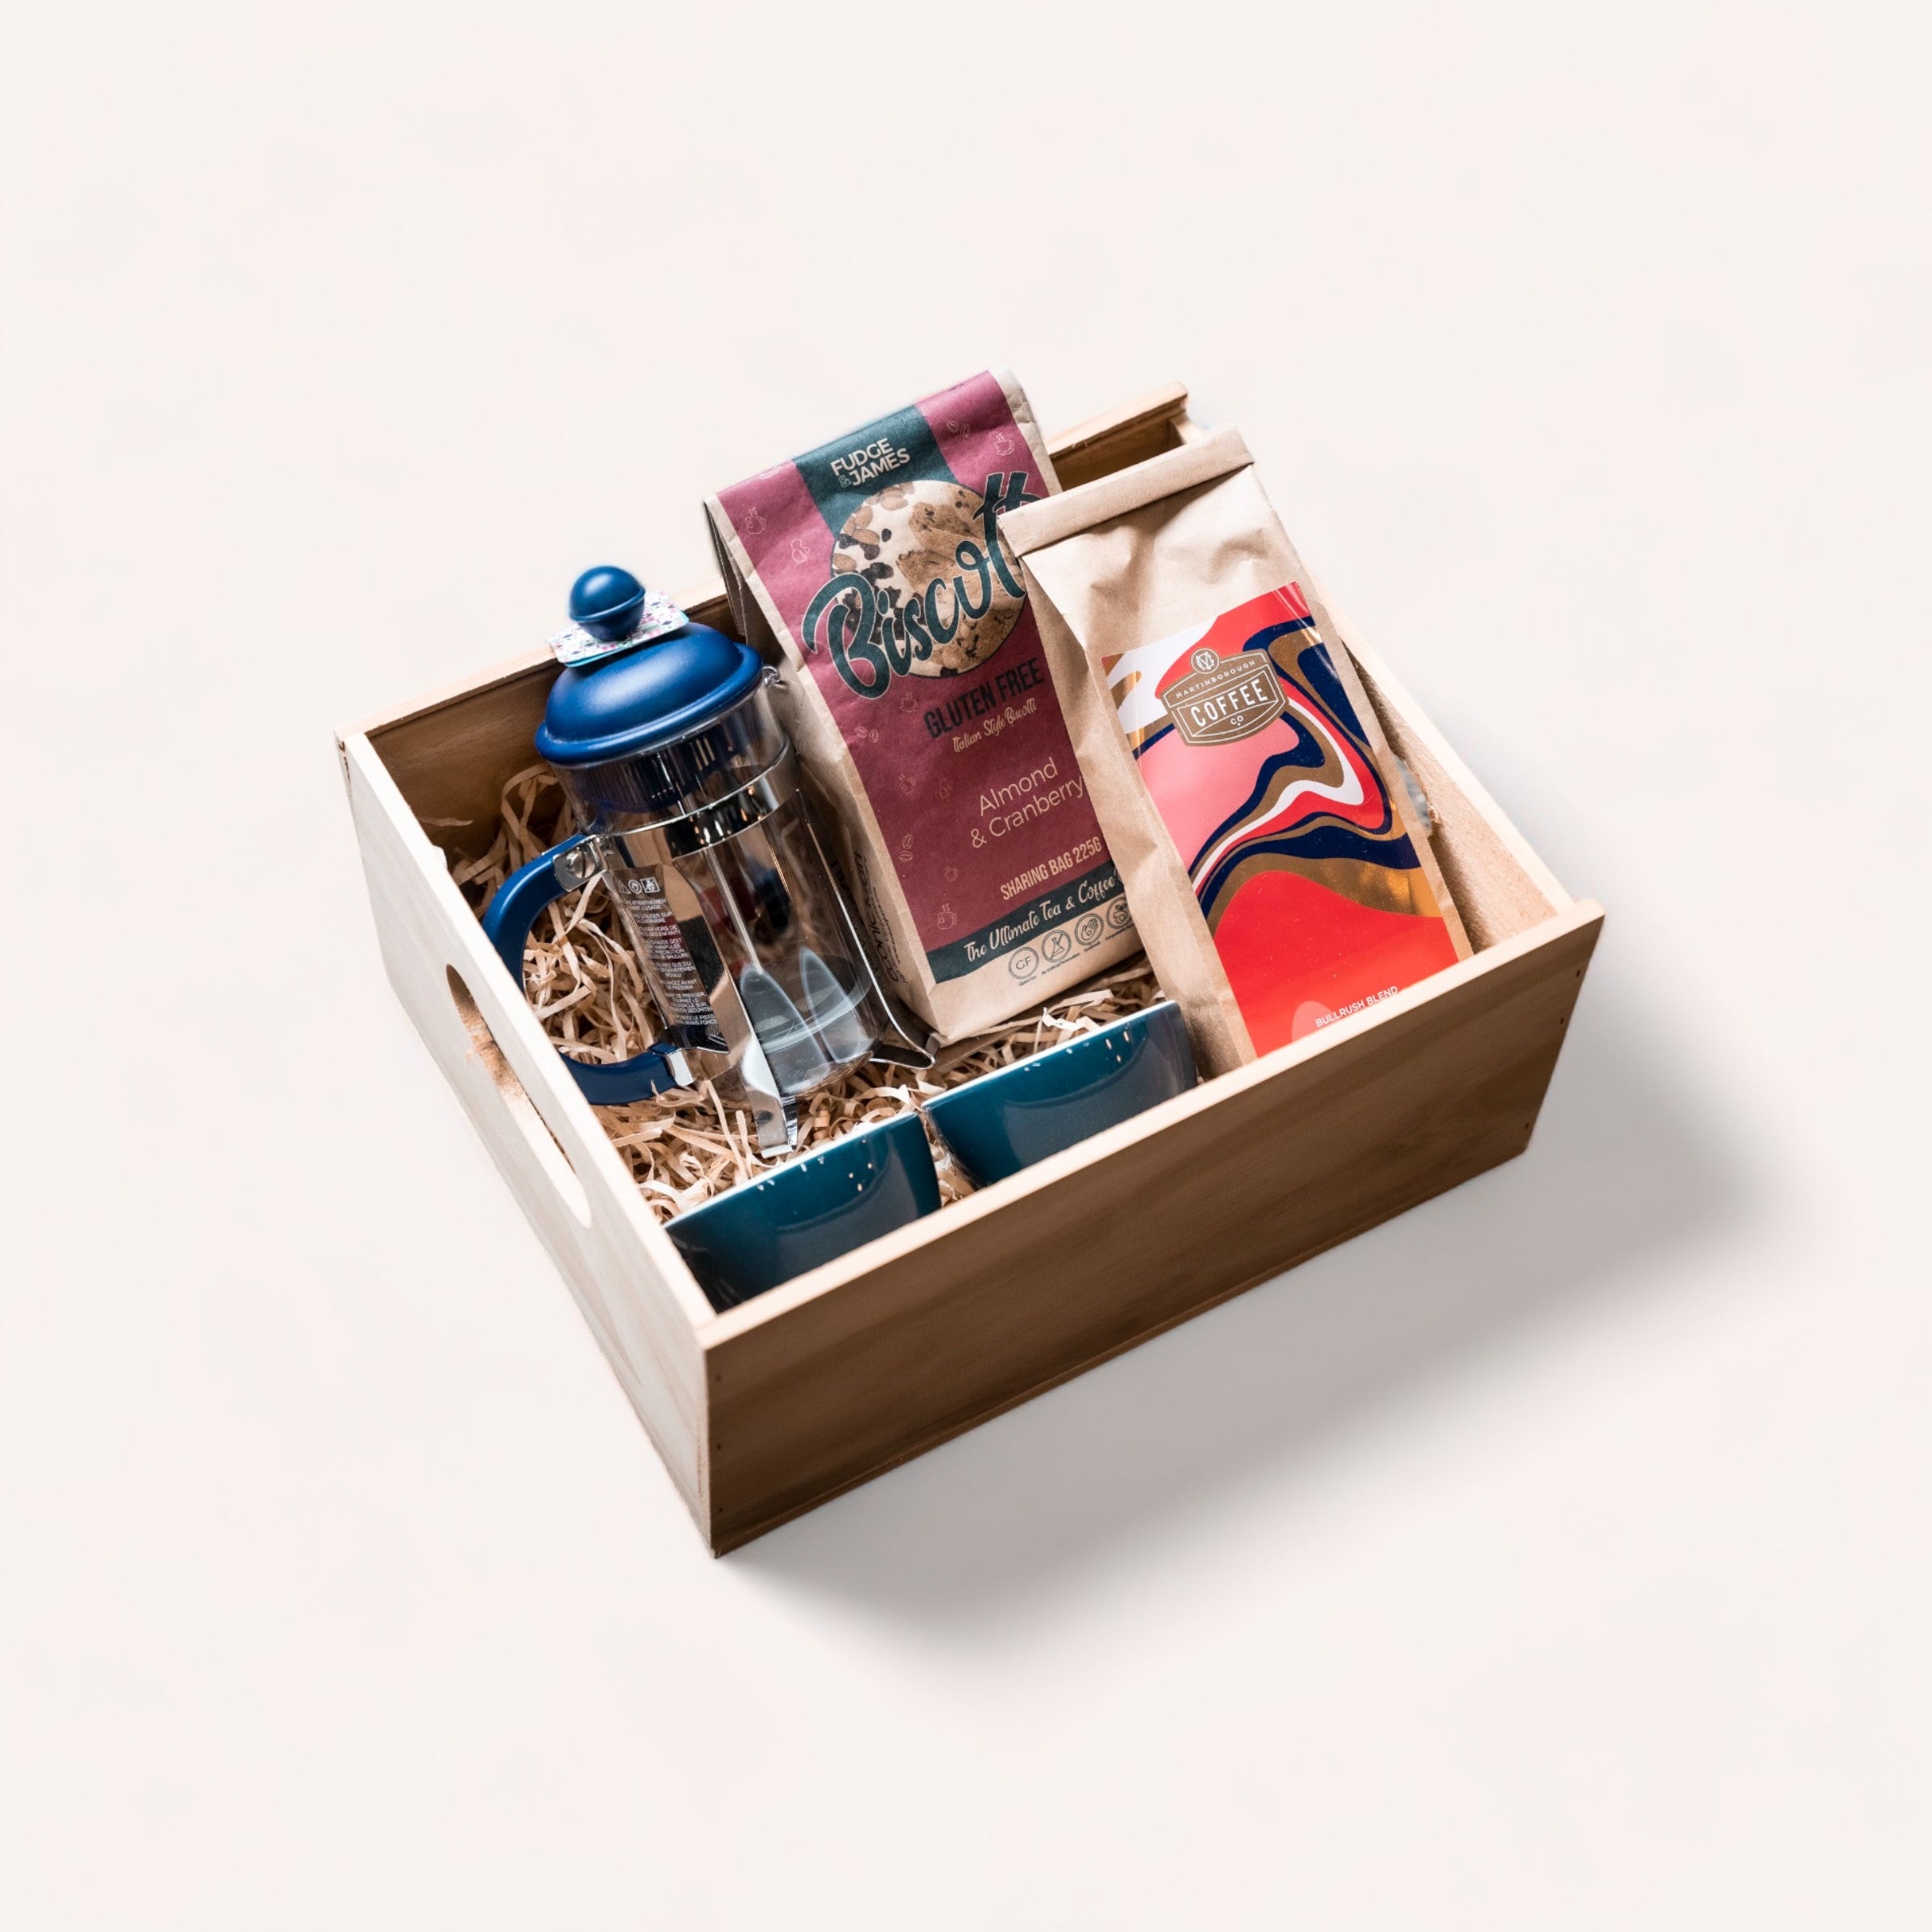 A cozy coffee-lover's gift set with an ACME Coffee Cups, gourmet Martinborough Coffee, and biscuits neatly arranged in a wooden box with compartments from giftbox co.